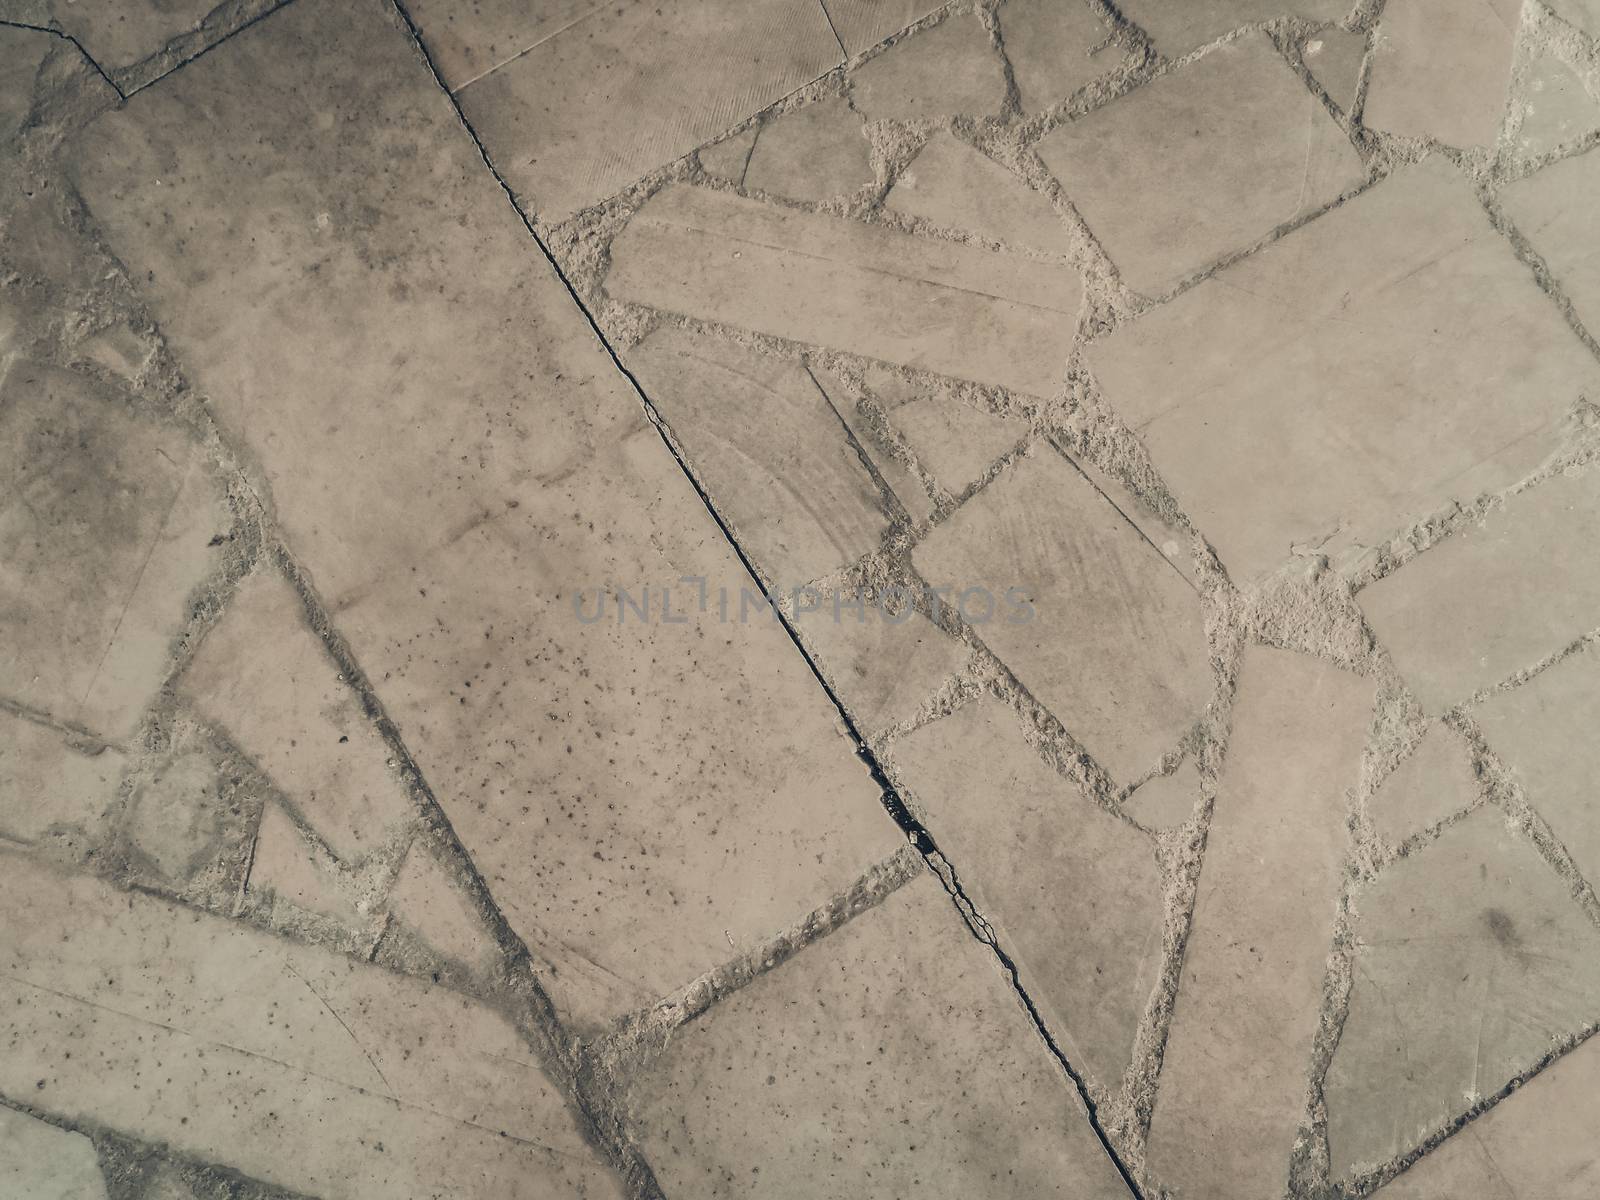 Background texture of stone wall or floor